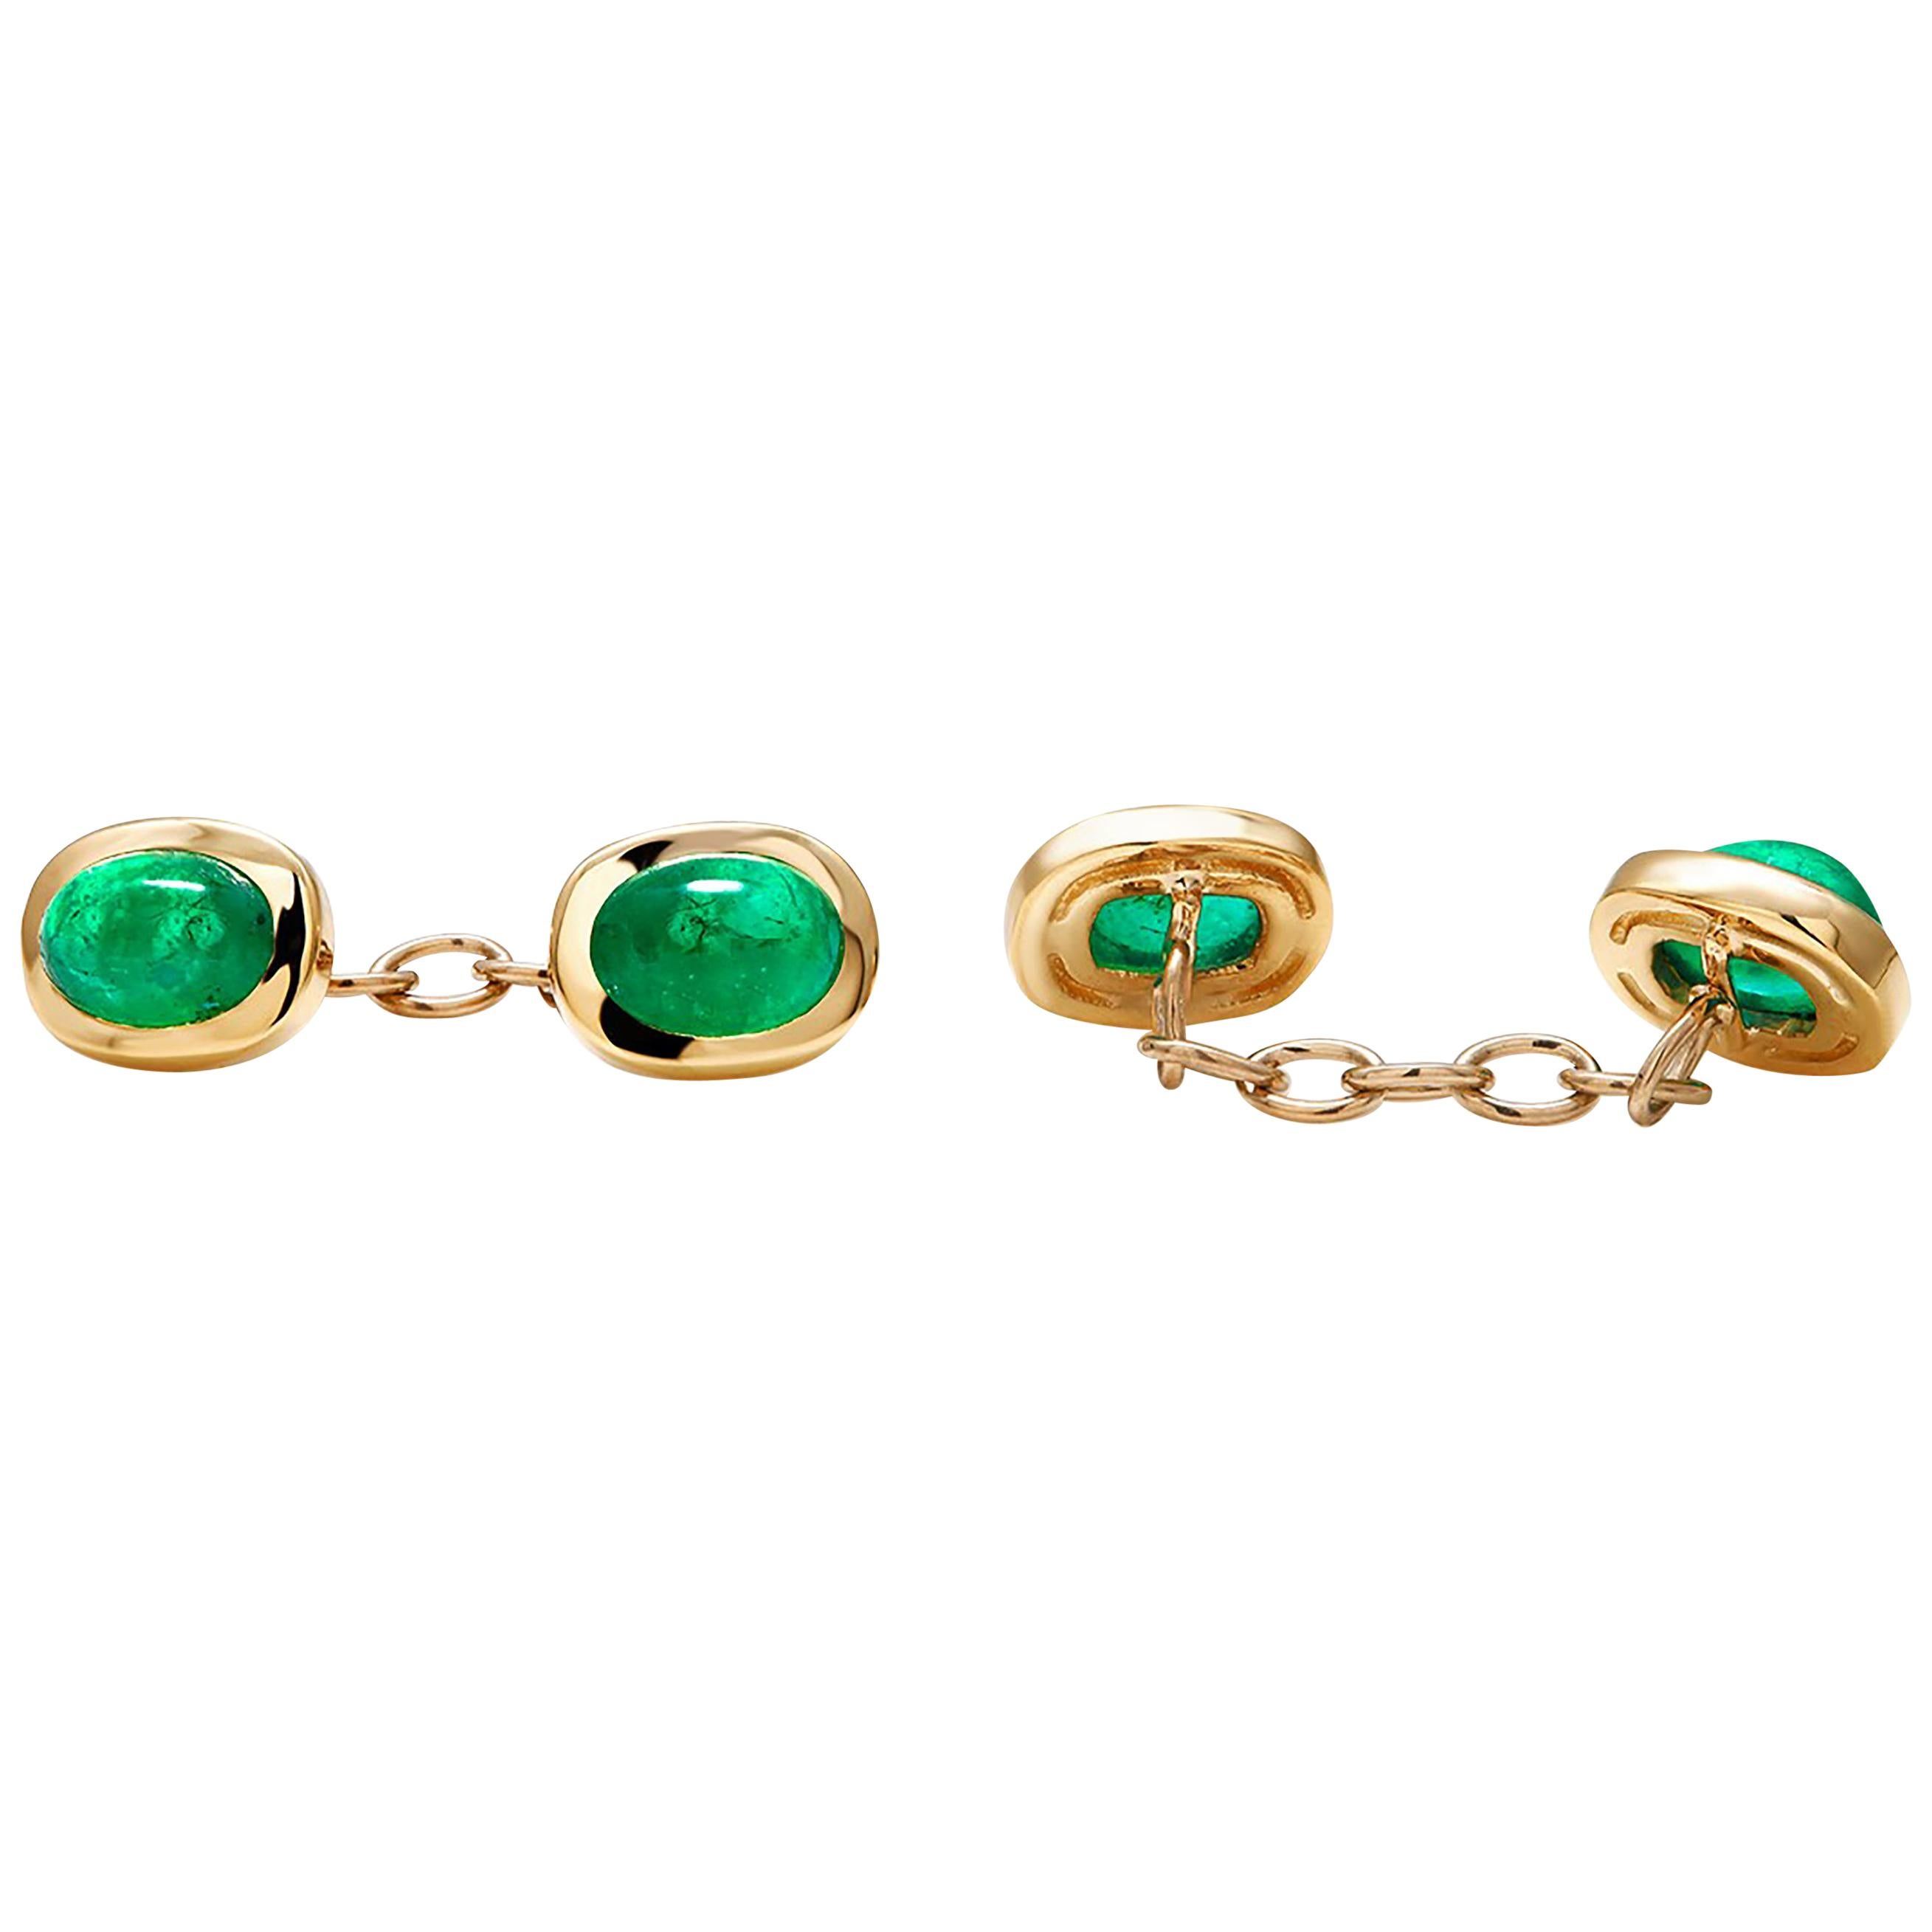 Women's or Men's Modern Matching Pair of Cabochon Emerald Gents Double Sides Chain Link Cufflinks